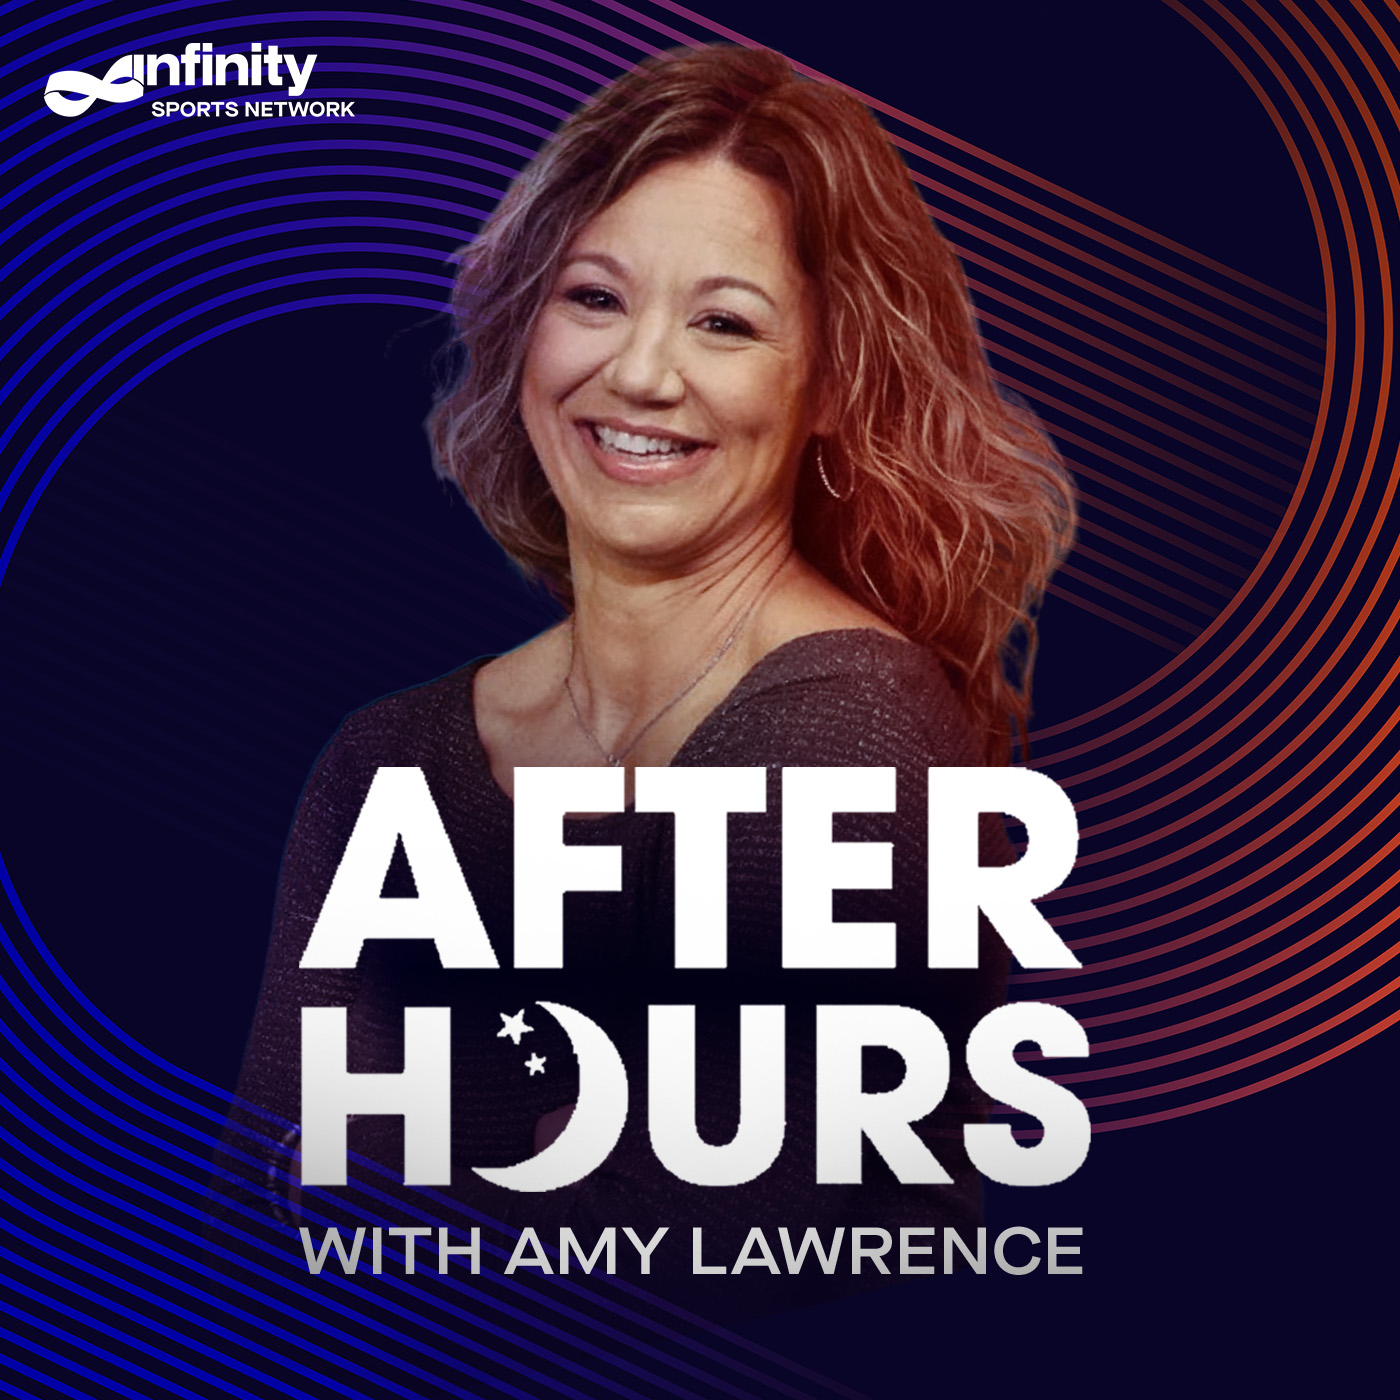 11-22-21 After Hours with Amy Lawrence PODCAST: Hour 4